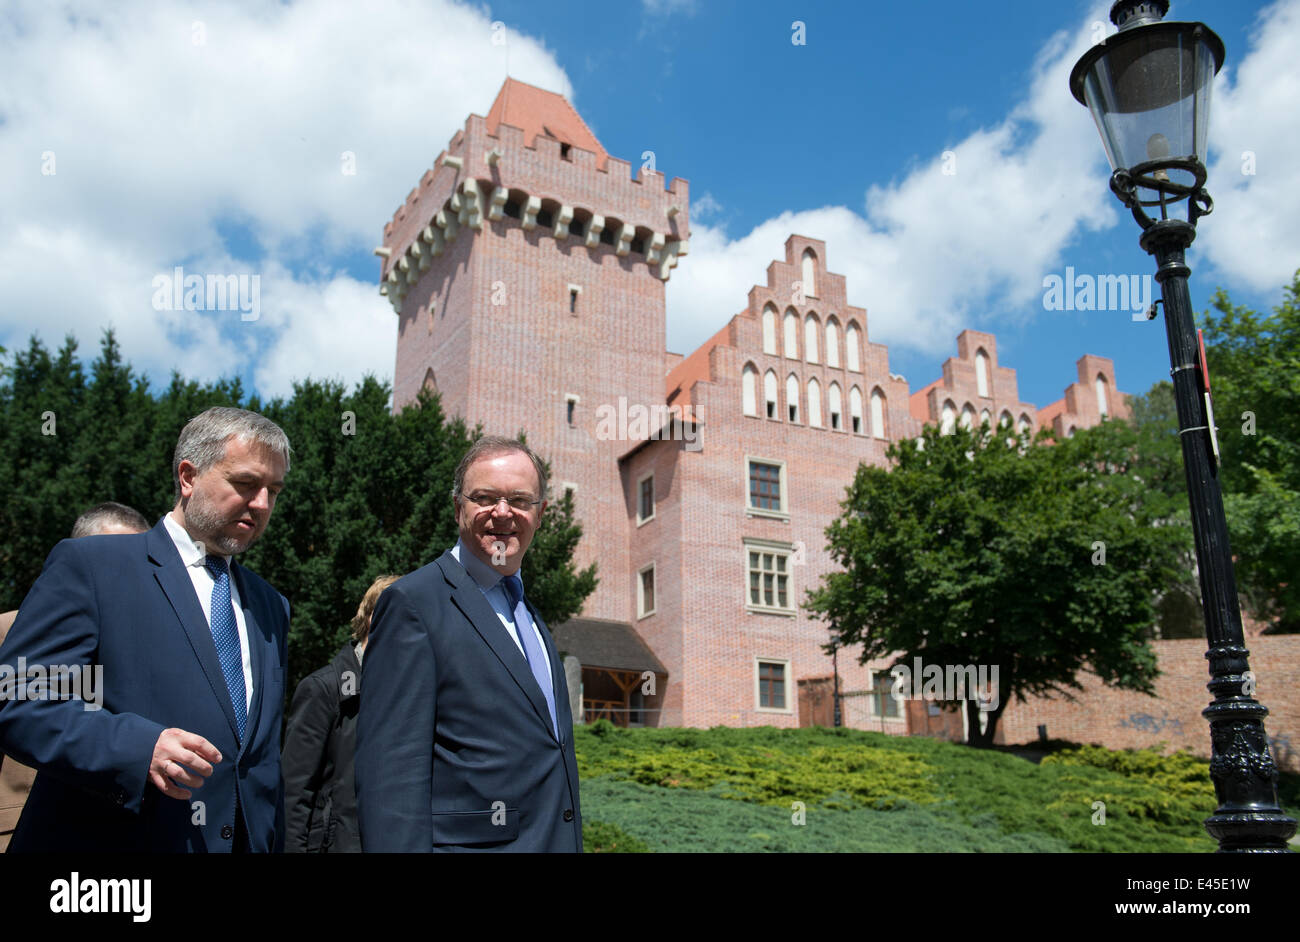 Poznan, Poland. 3rd July, 2014. President of the German Federal Council and Premier of Lower Saxony Stephan Weil (L) poses with Greater Poland Voivode Marek Wozniak in the historic inner city in Poznan, Poland, 03 July 2014. Weil is attending political talks in Warsaw in his role as Federal Council President. Photo: JOCHEN LUEBKE/dpa/Alamy Live News Stock Photo